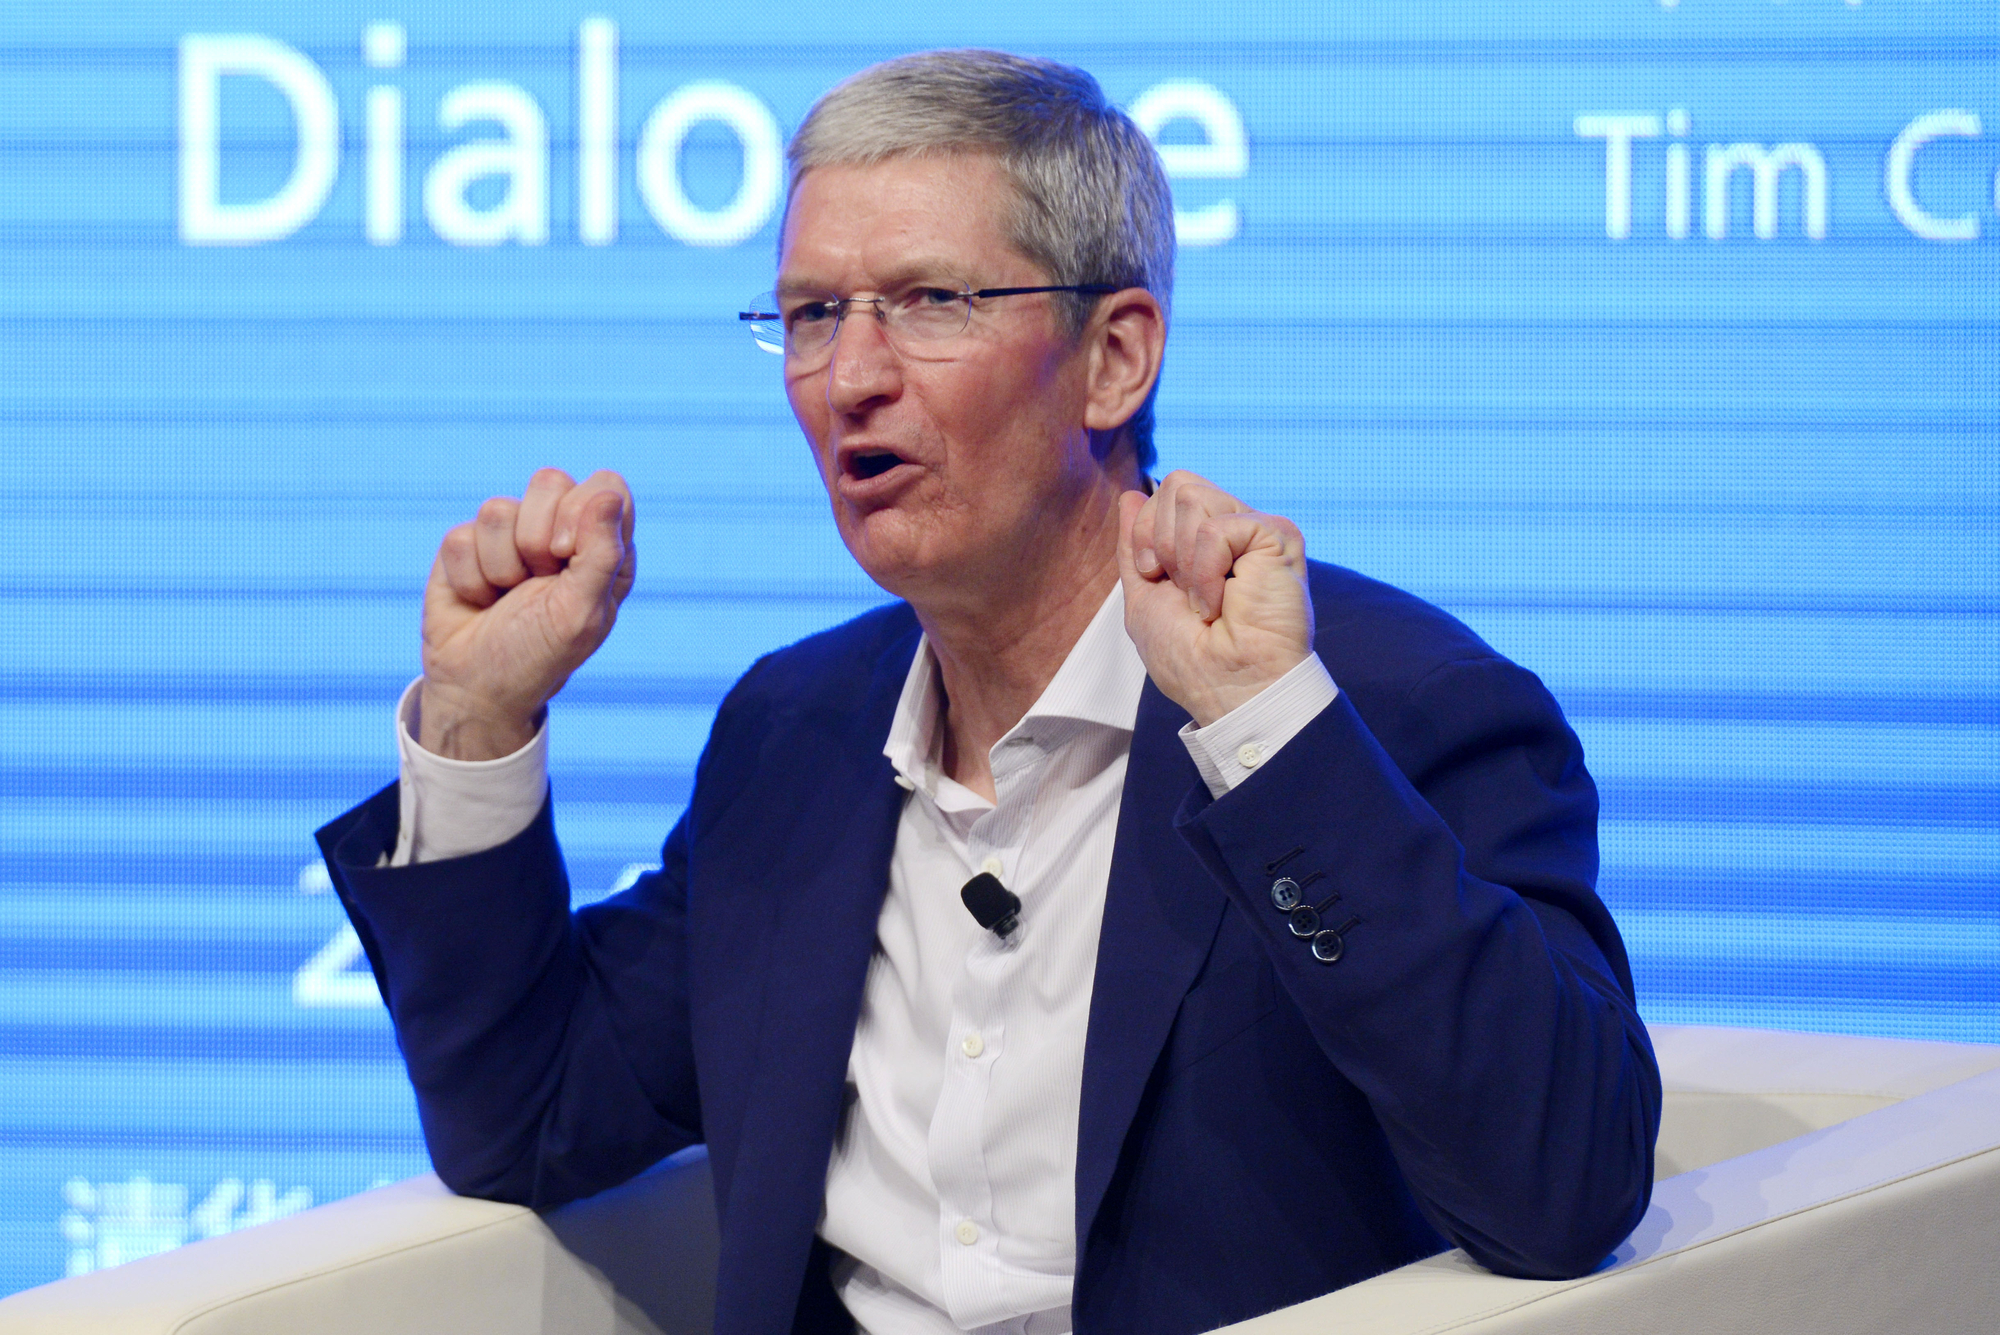 Tim Cook, CEO of Apple Inc., speaks at a dialogue with Qian Ying, dean of the School of Economics and Management (SEM), during the Tsinghua Management Global Forum at Tsinghua University in Beijing, China, 23 October 2014.

Tim Cook attended a dialogue with Qian Ying, dean of the School of Economics and Management, at Beijing's Tsinghua University on Thursday (23 October 2014). Cook is visiting China, where he has toured Foxconn Technology Co's iPhone factory in Zhengzhou and looked at local retail operations. On Wednesday, Cook met with China's Vice Minister Ma Kai, where the two exchanged views on "protection of users' information" as well as "strengthening cooperation," according to the official Xinhua News Agency. The Apple chief also said the company is cooperating with Chinese firms including Baidu Inc and Alibaba Group Holding Ltd. Cook also said he will meet with Jack Ma, Alibaba's chairman, on next Monday.